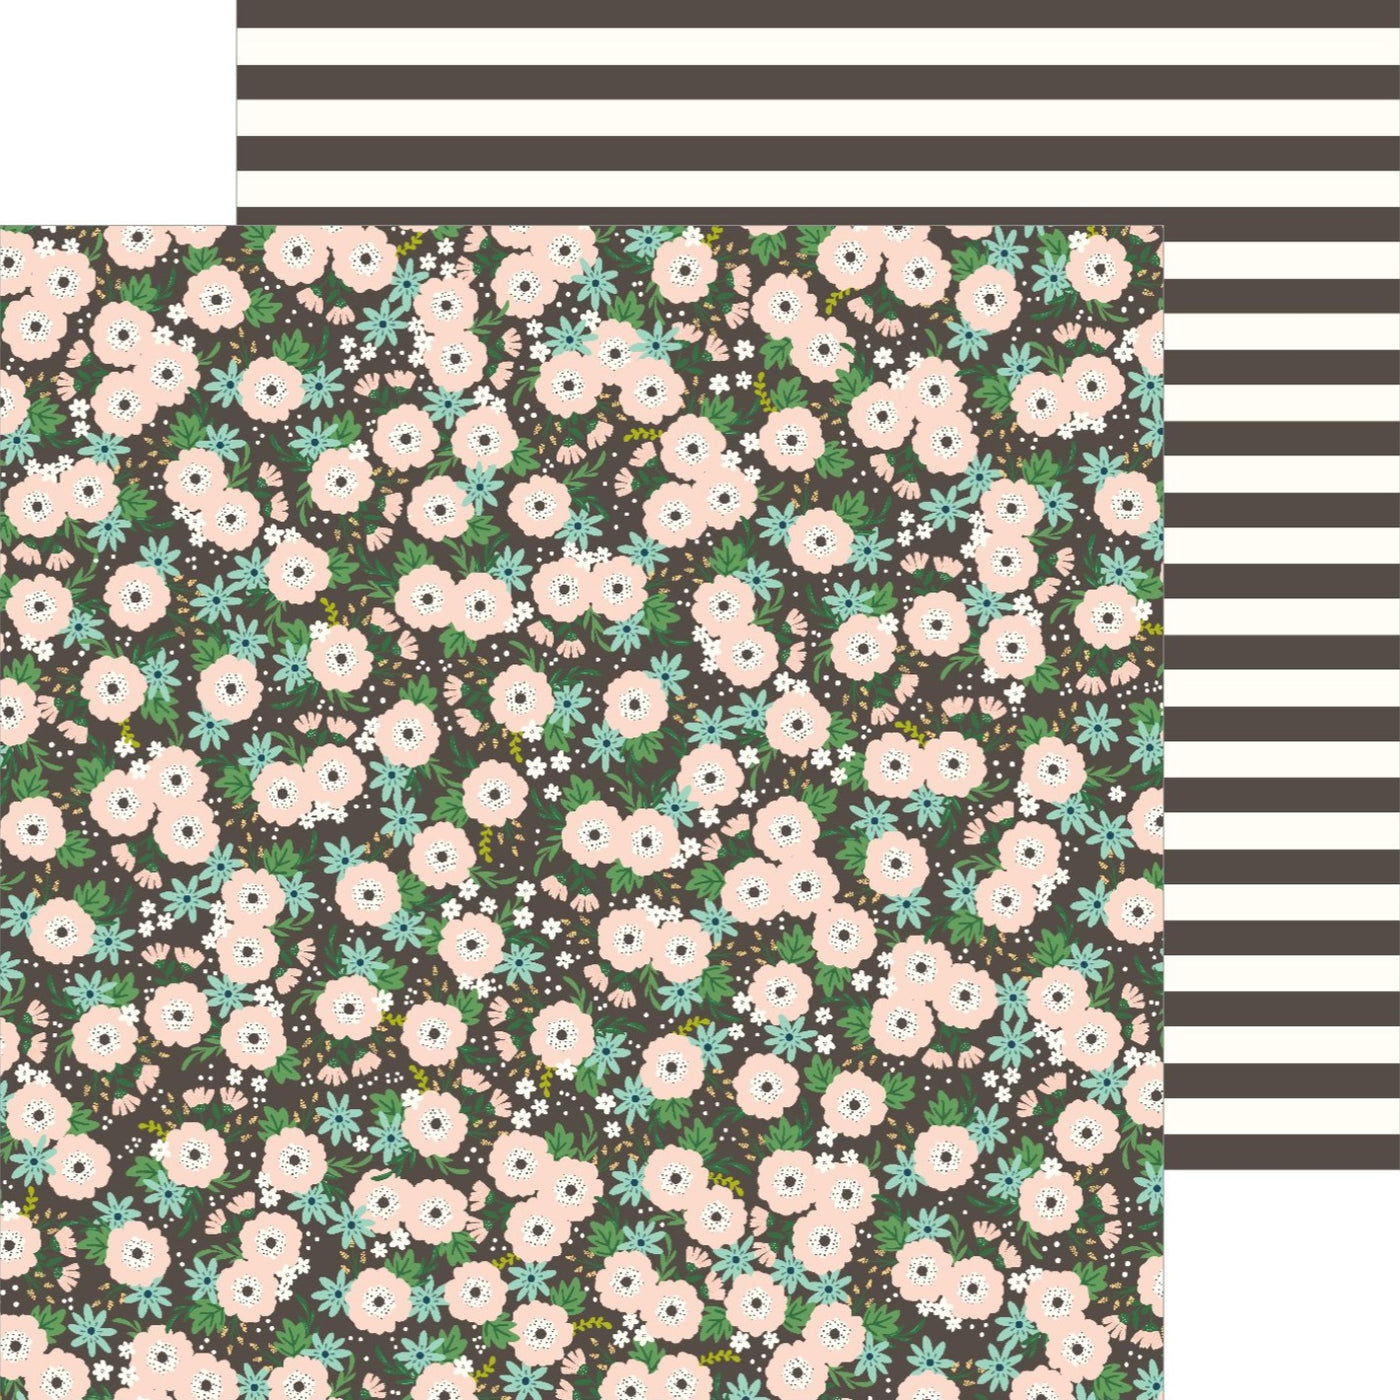 12x12 double-sided patterned cardstock with floral pattern on front and stripes on reverse - Bloom by Jen Hadfield